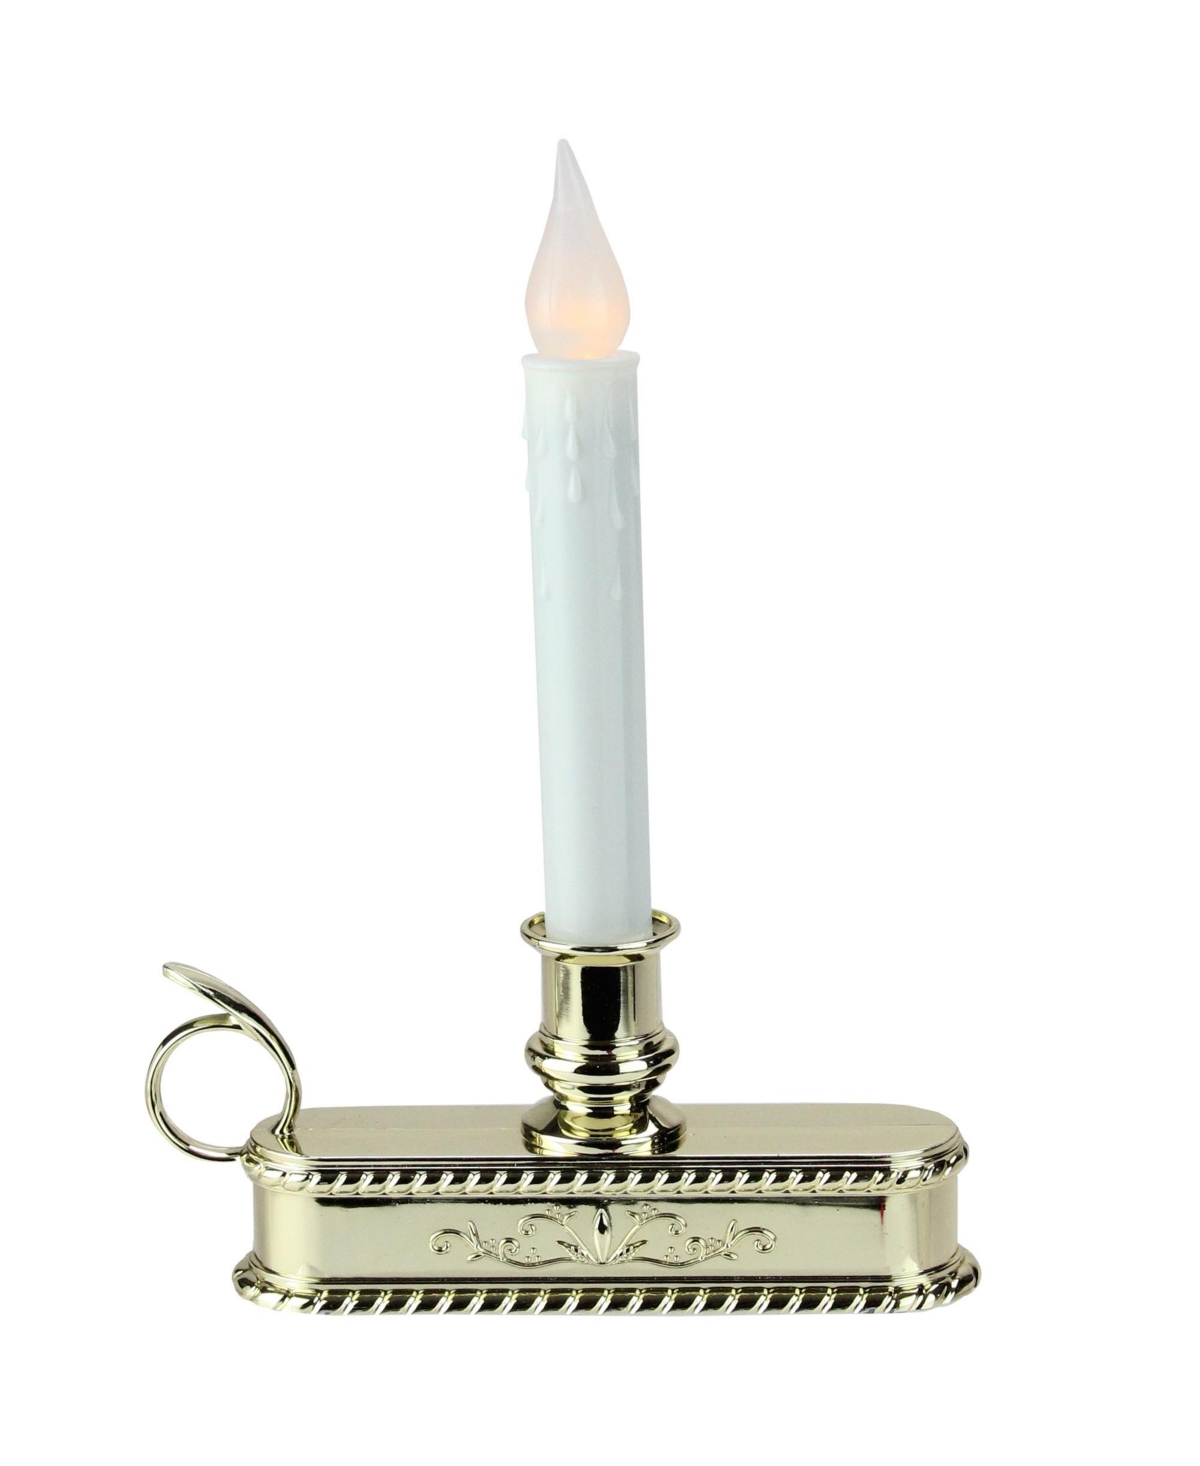 8.75" Battery Operated Led Flickering Christmas Window Candle Lamp with Handle Base - White